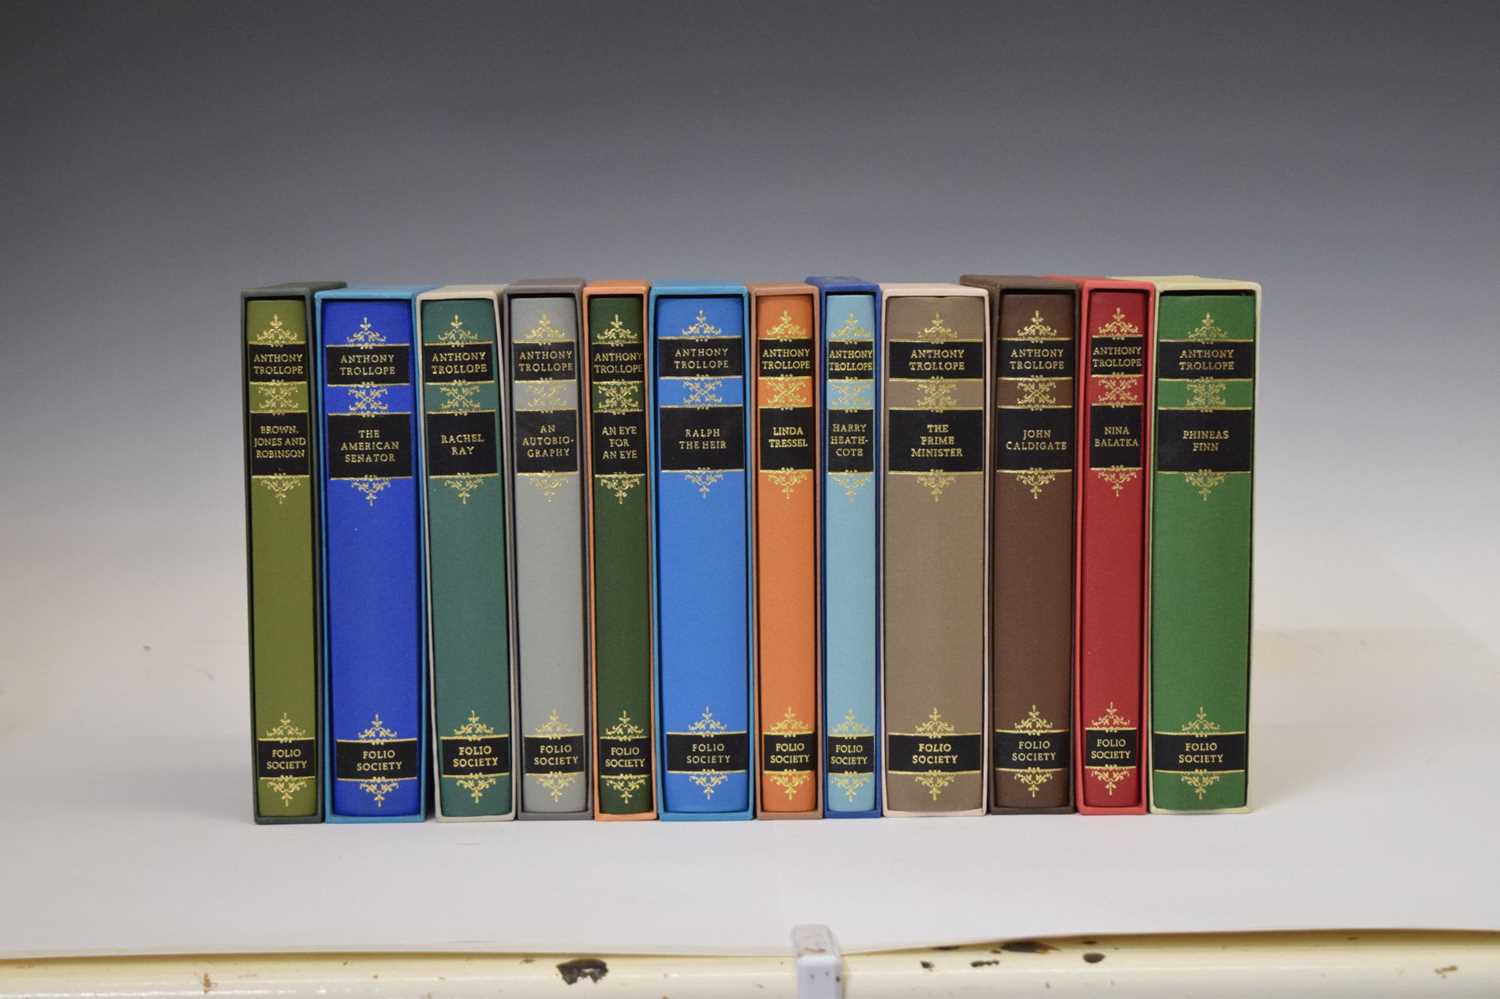 Twelve books by Anthony Trollope, Folio Society editions in slipcases - Image 2 of 8